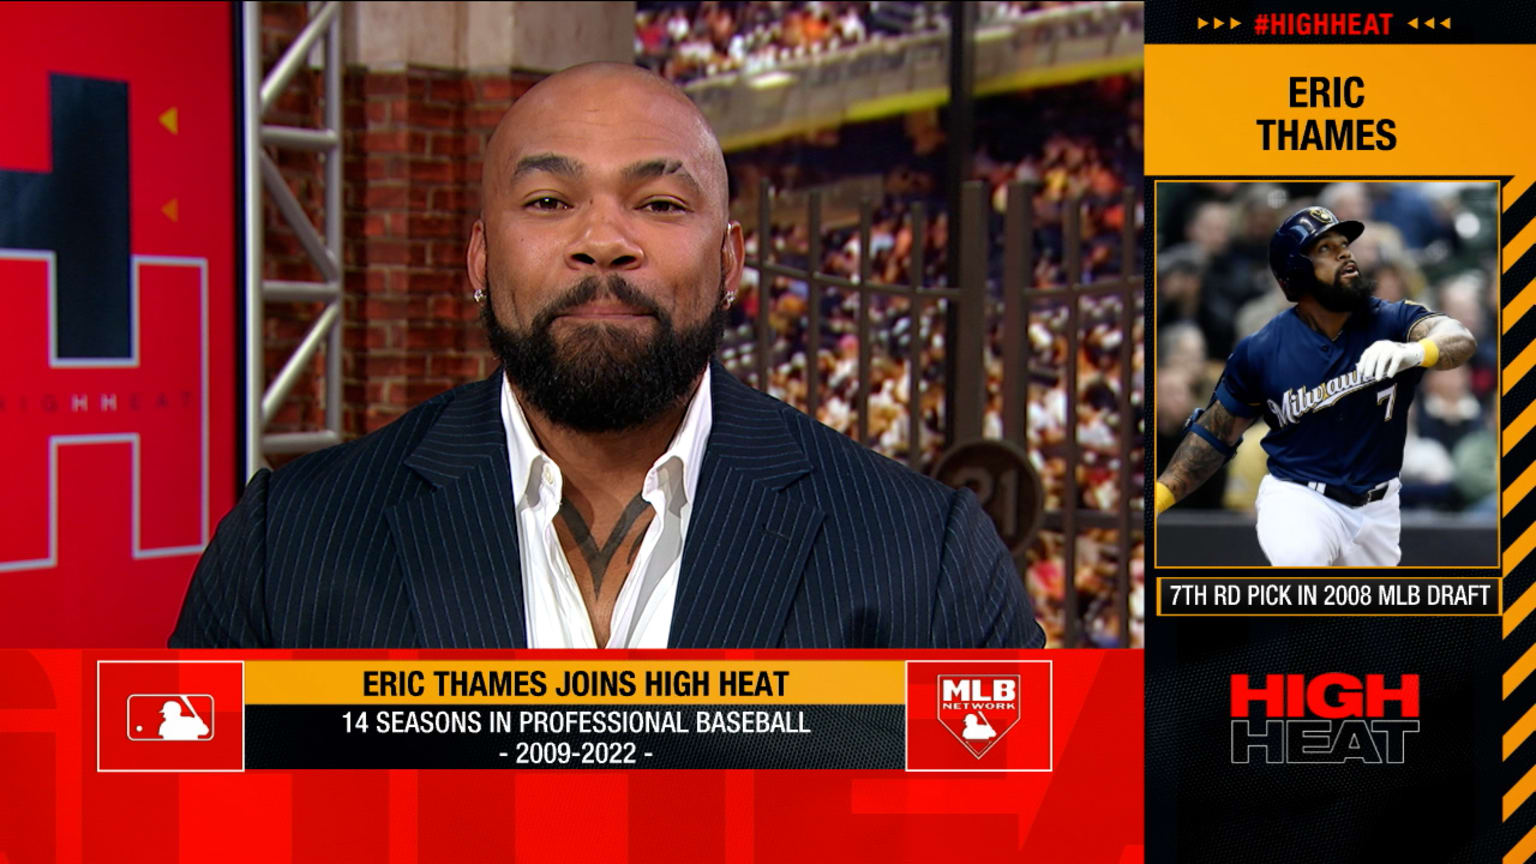 Get to Know: Q&A with Brewers first baseman Eric Thames